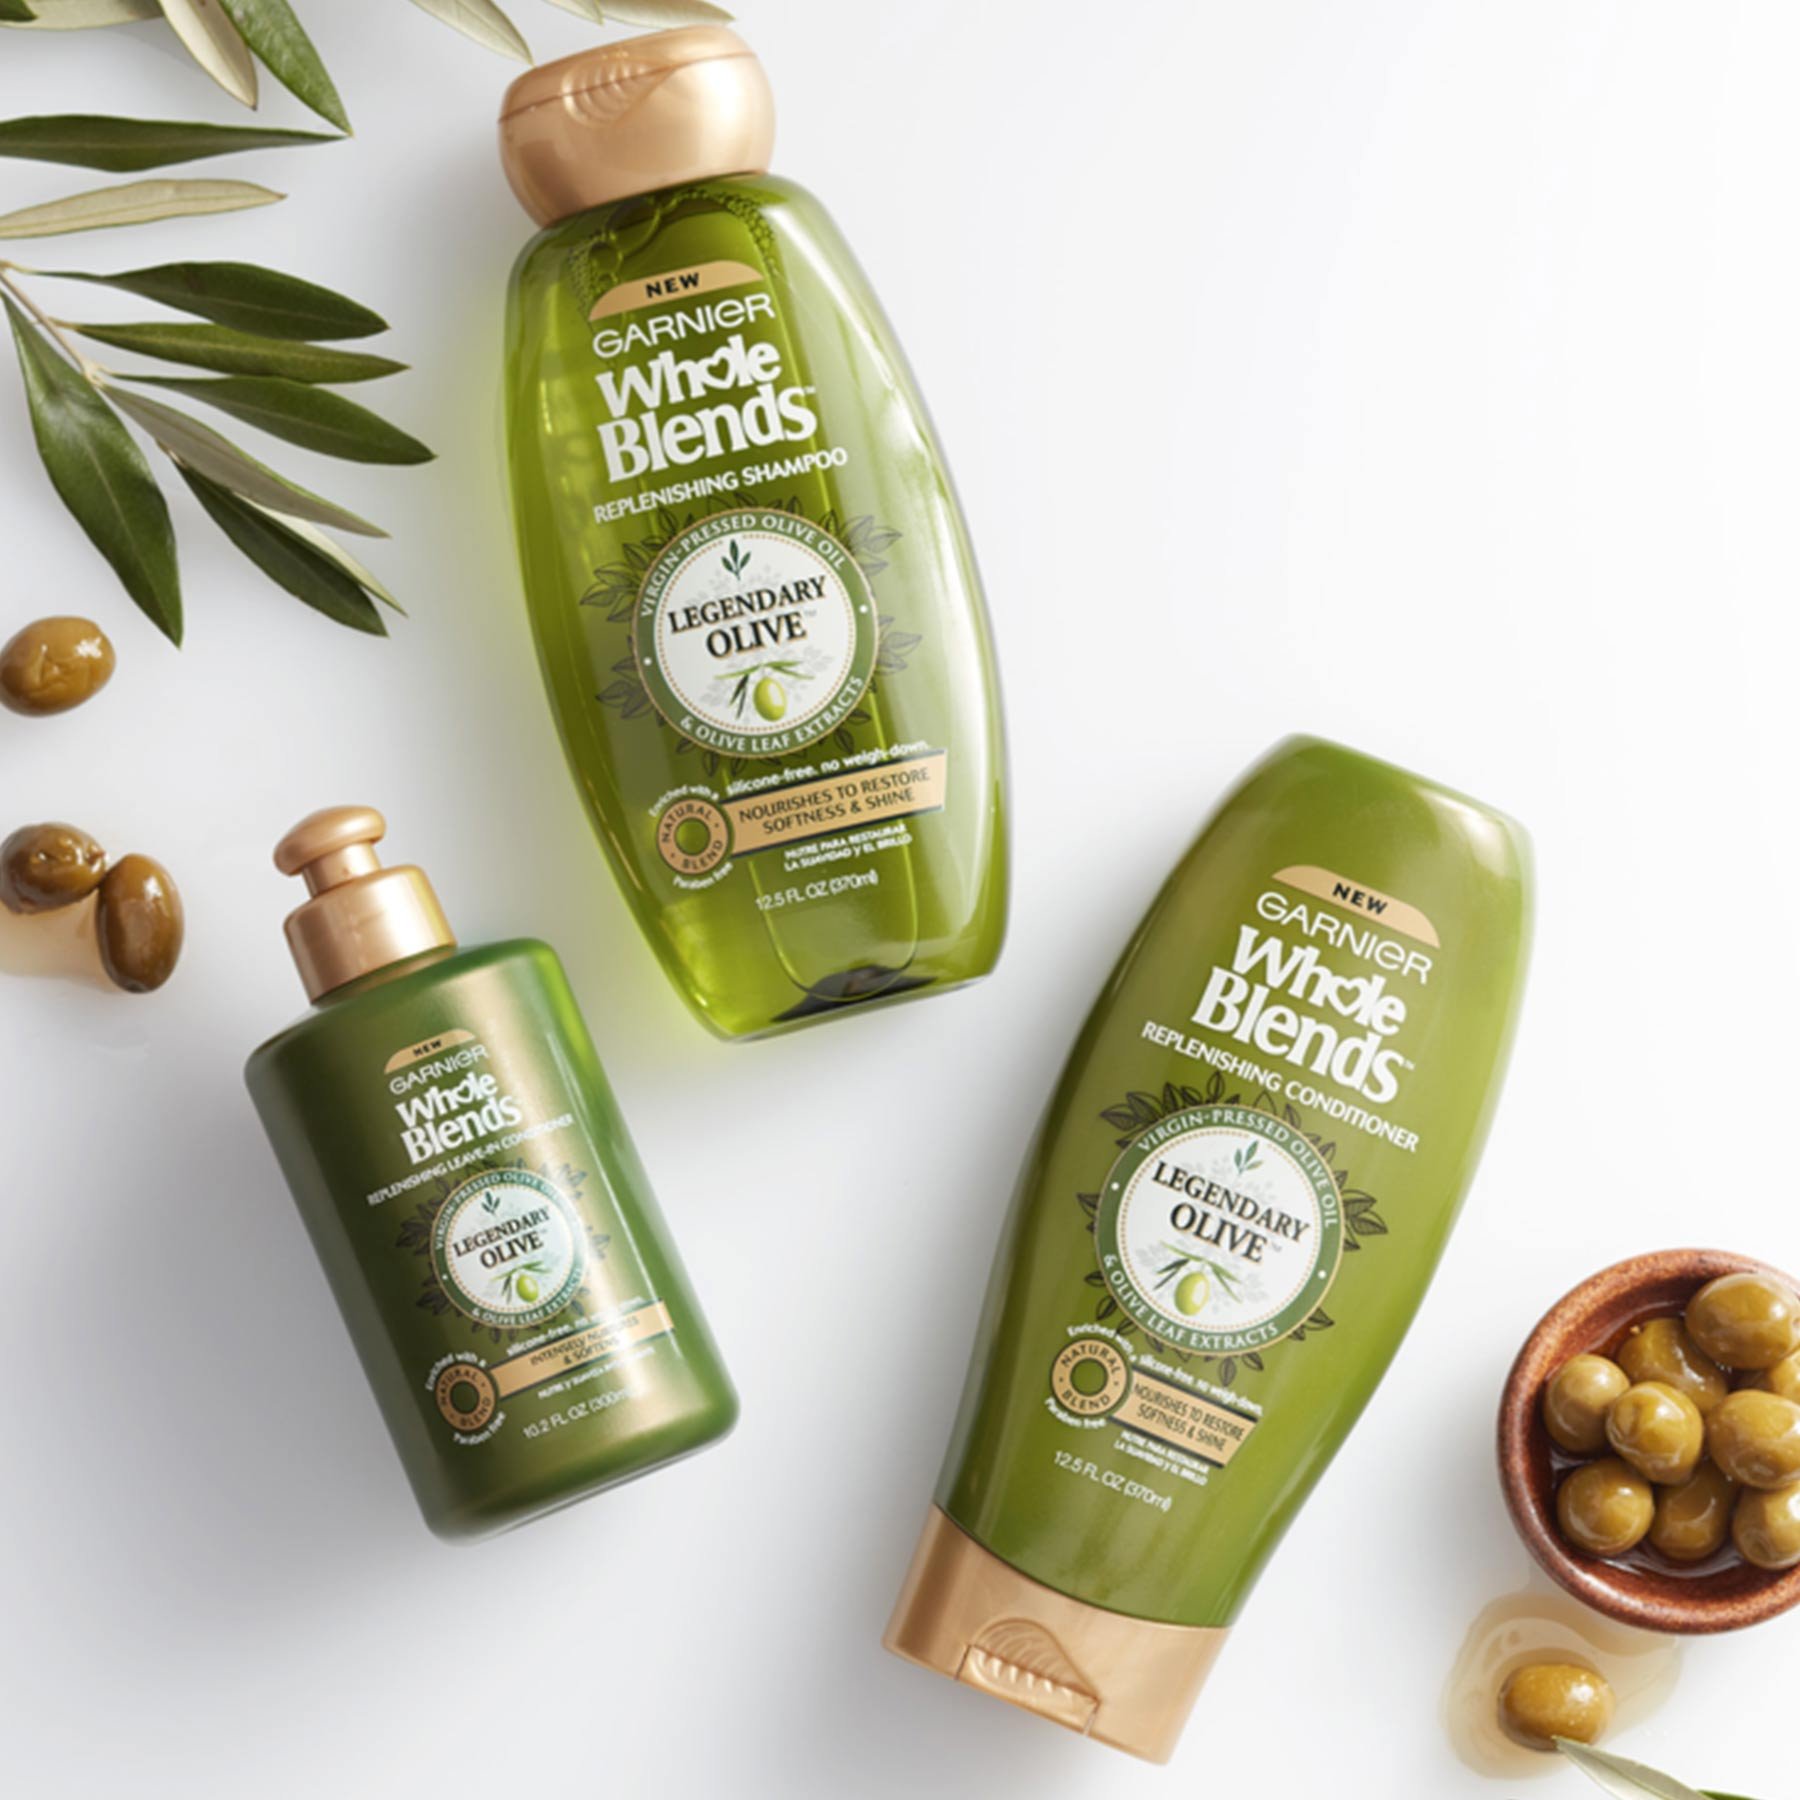 Whole Blends Legendary Olive Shampoo, Legendary Olive Conditioner, and Legendary Olive Leave-In Conditioner on a white background next to an earthen bowl of green olives in olive juice with some spilled out and olive leaves.